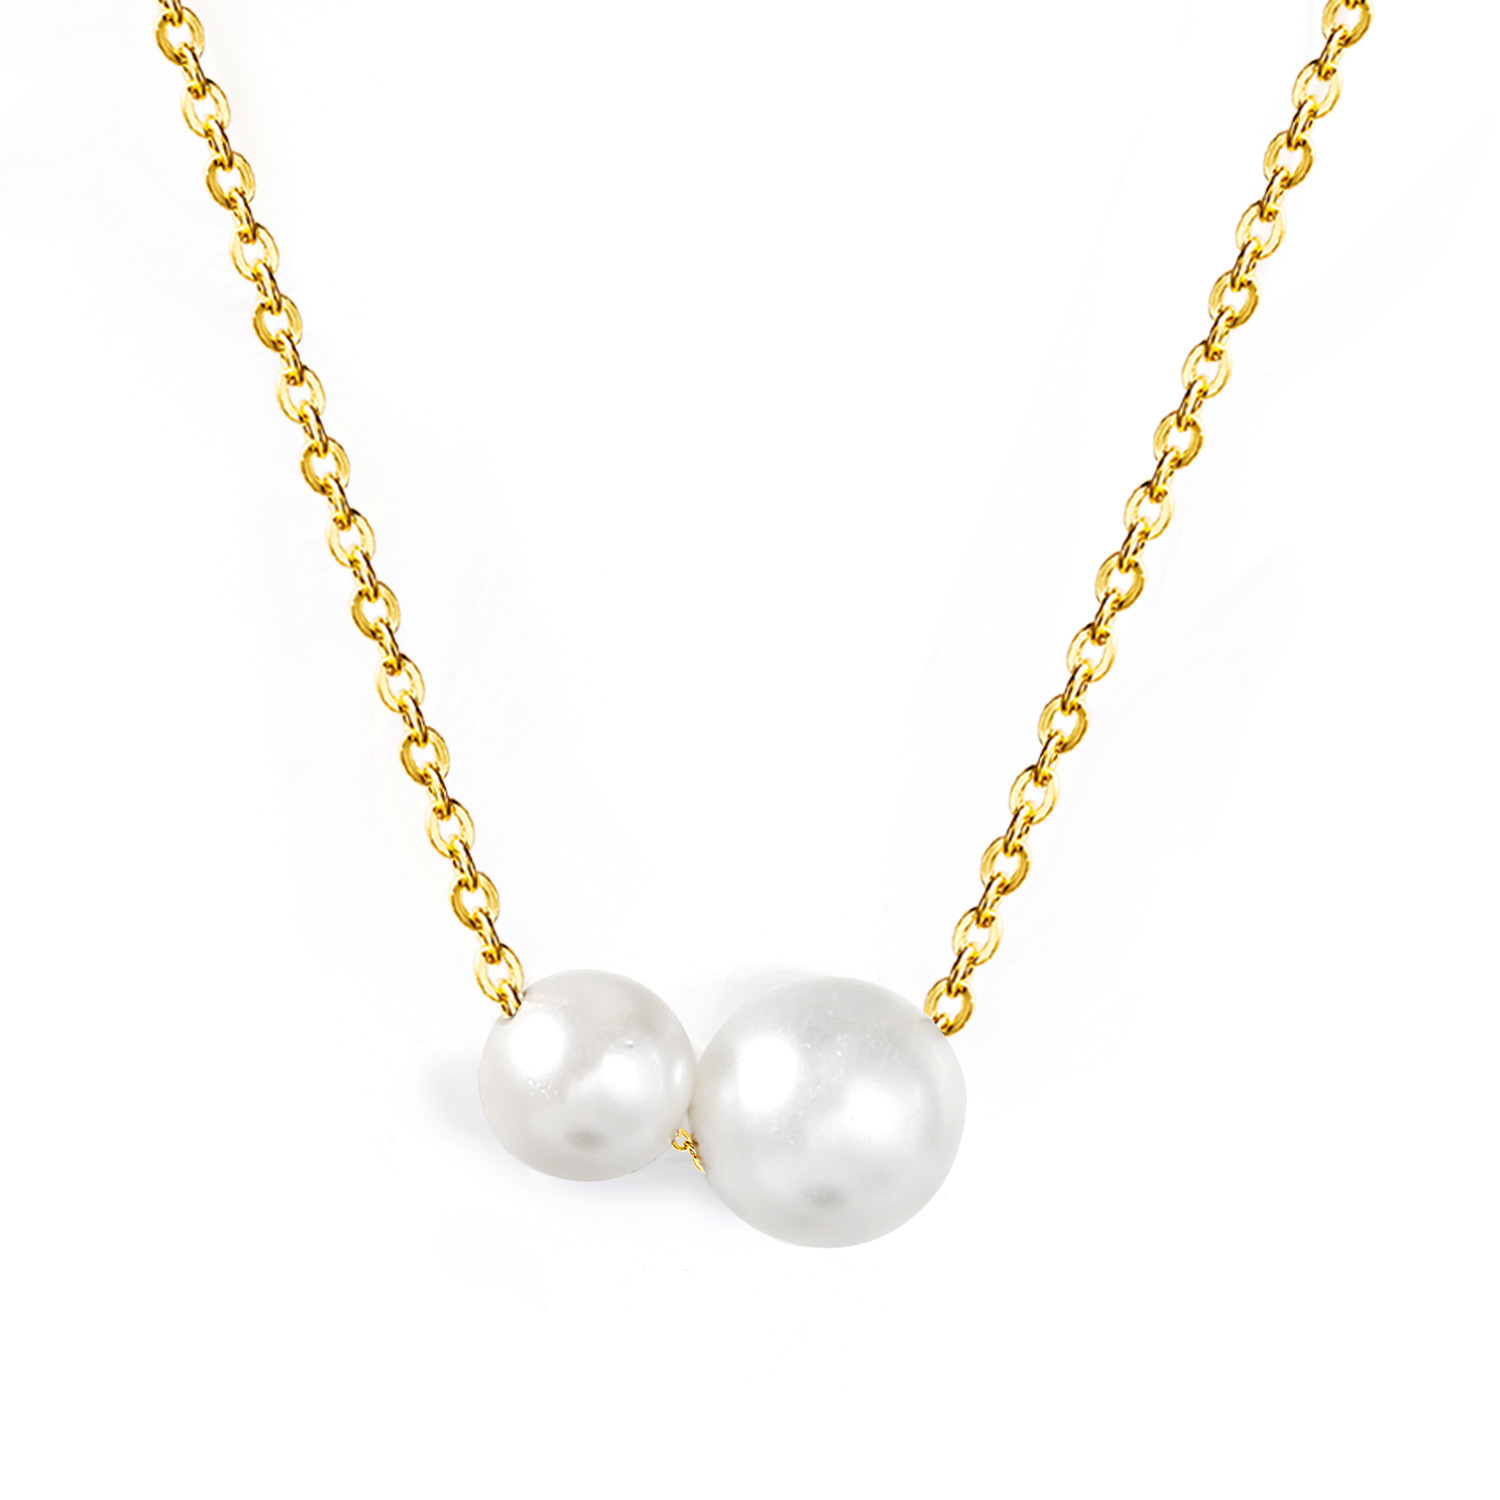 2 size white pearl necklace gold